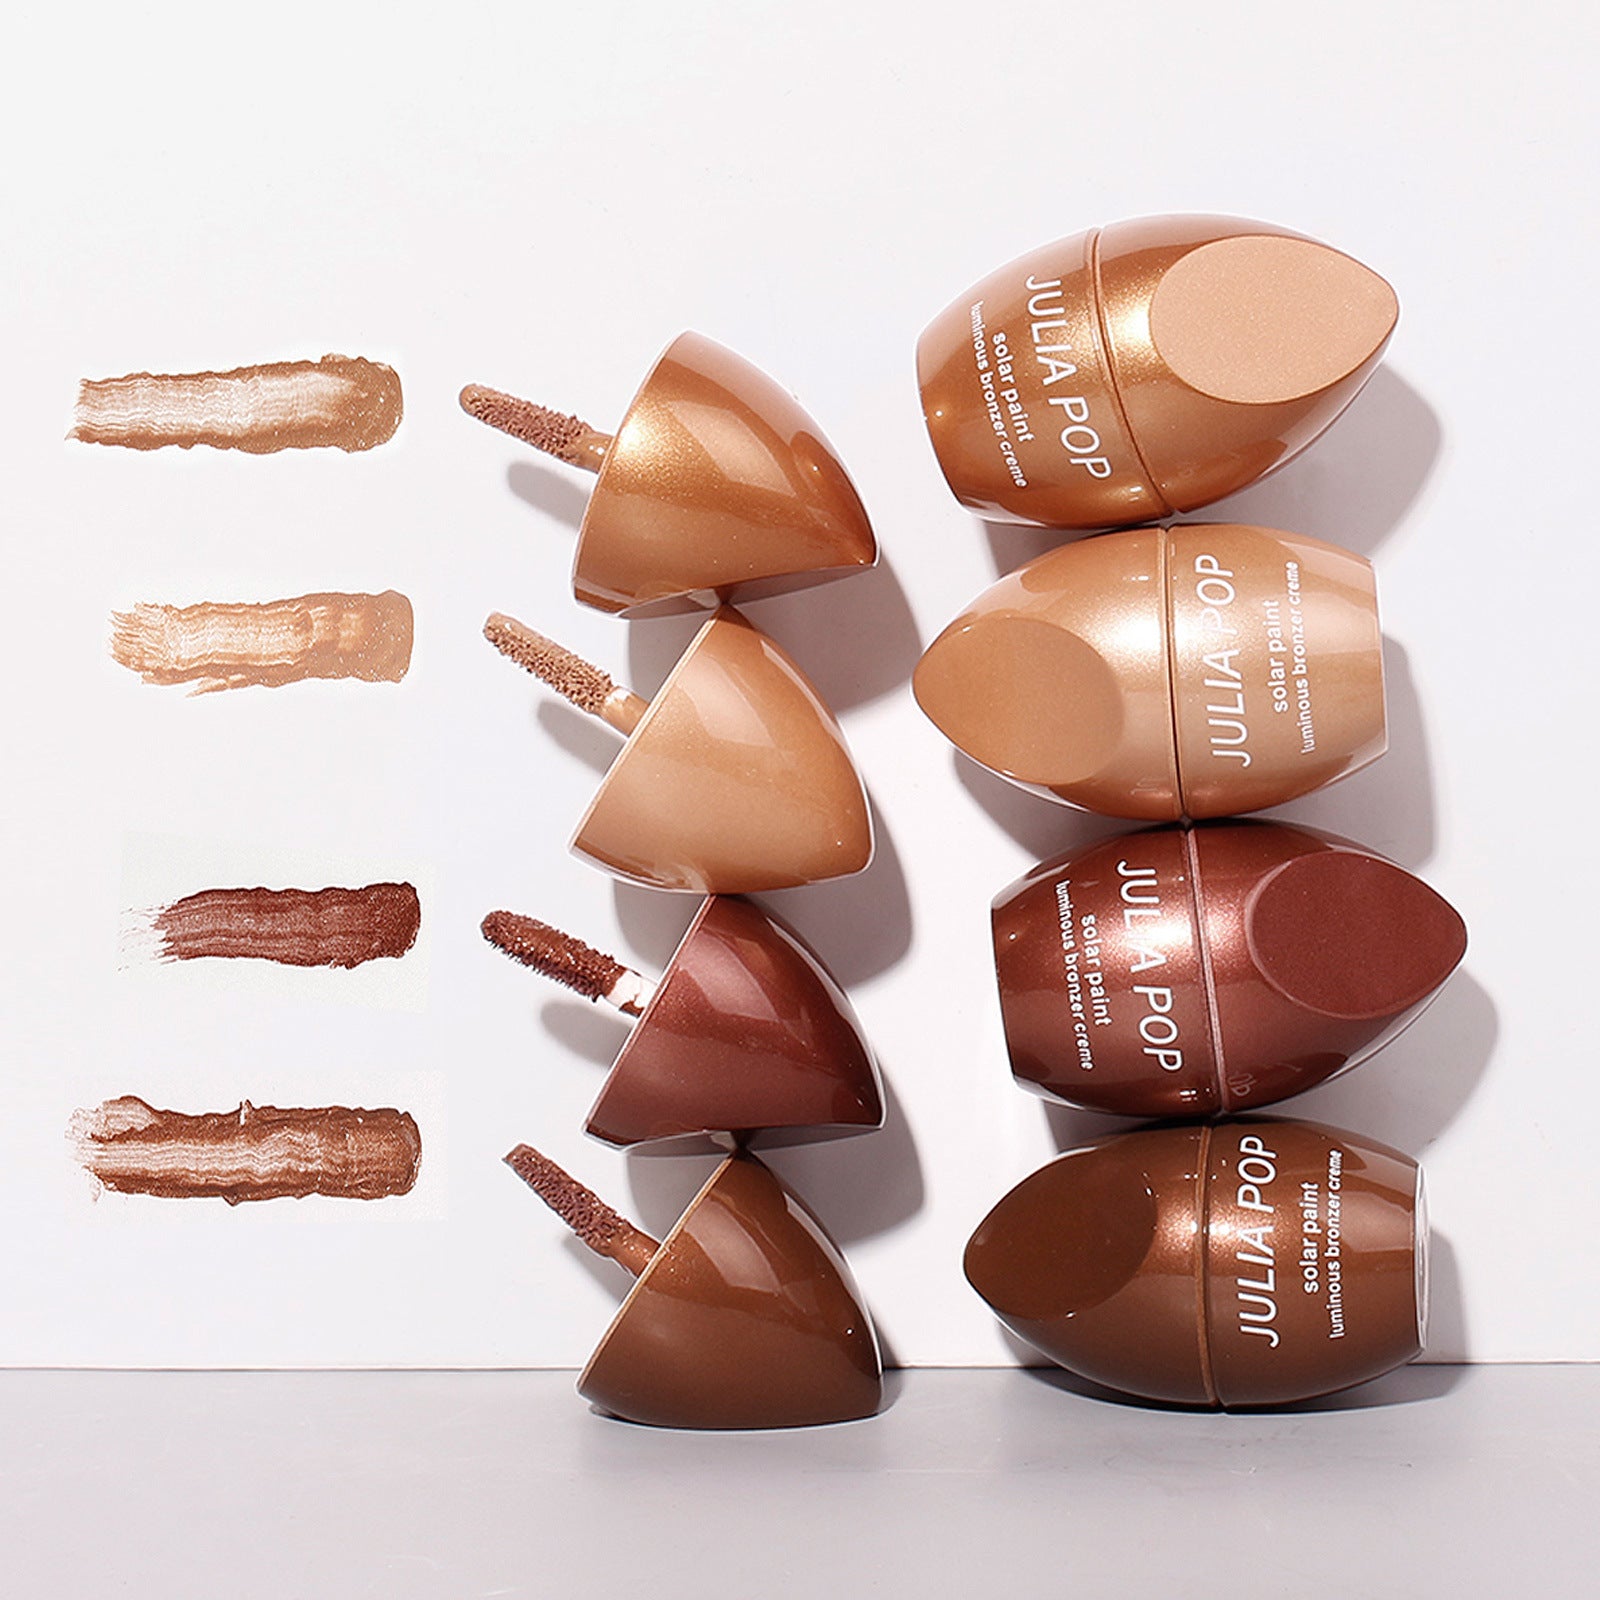 Bronze Tone Liquid Highlighted Face Mask Stick Deepens Contour Side Shadow Stereoscopic